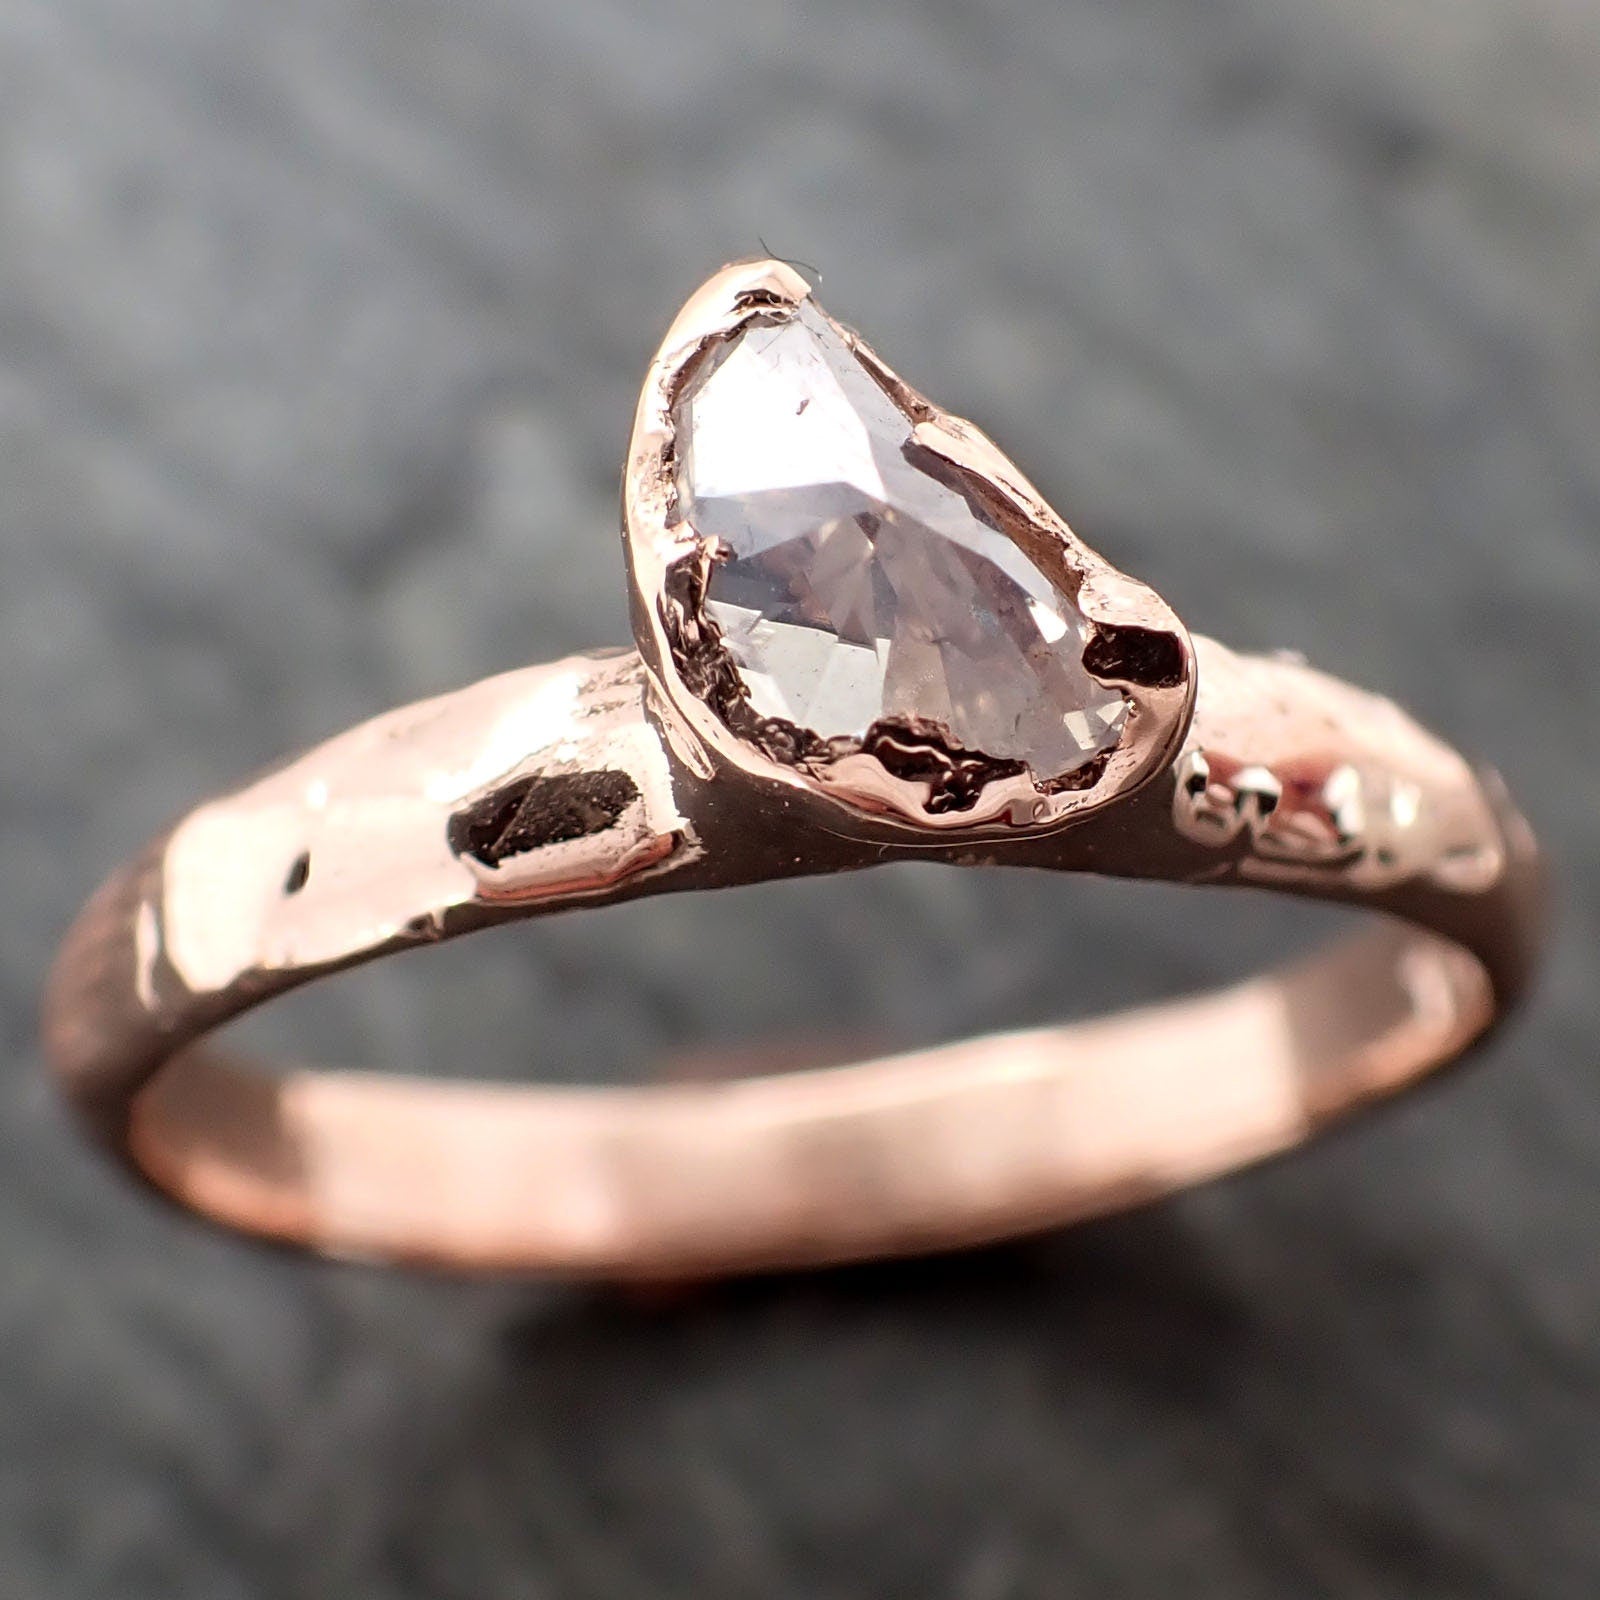 Faceted Fancy cut Champagne Half Moon Diamond Engagement 14k Rose Gold Solitaire Wedding Ring byAngeline 2912